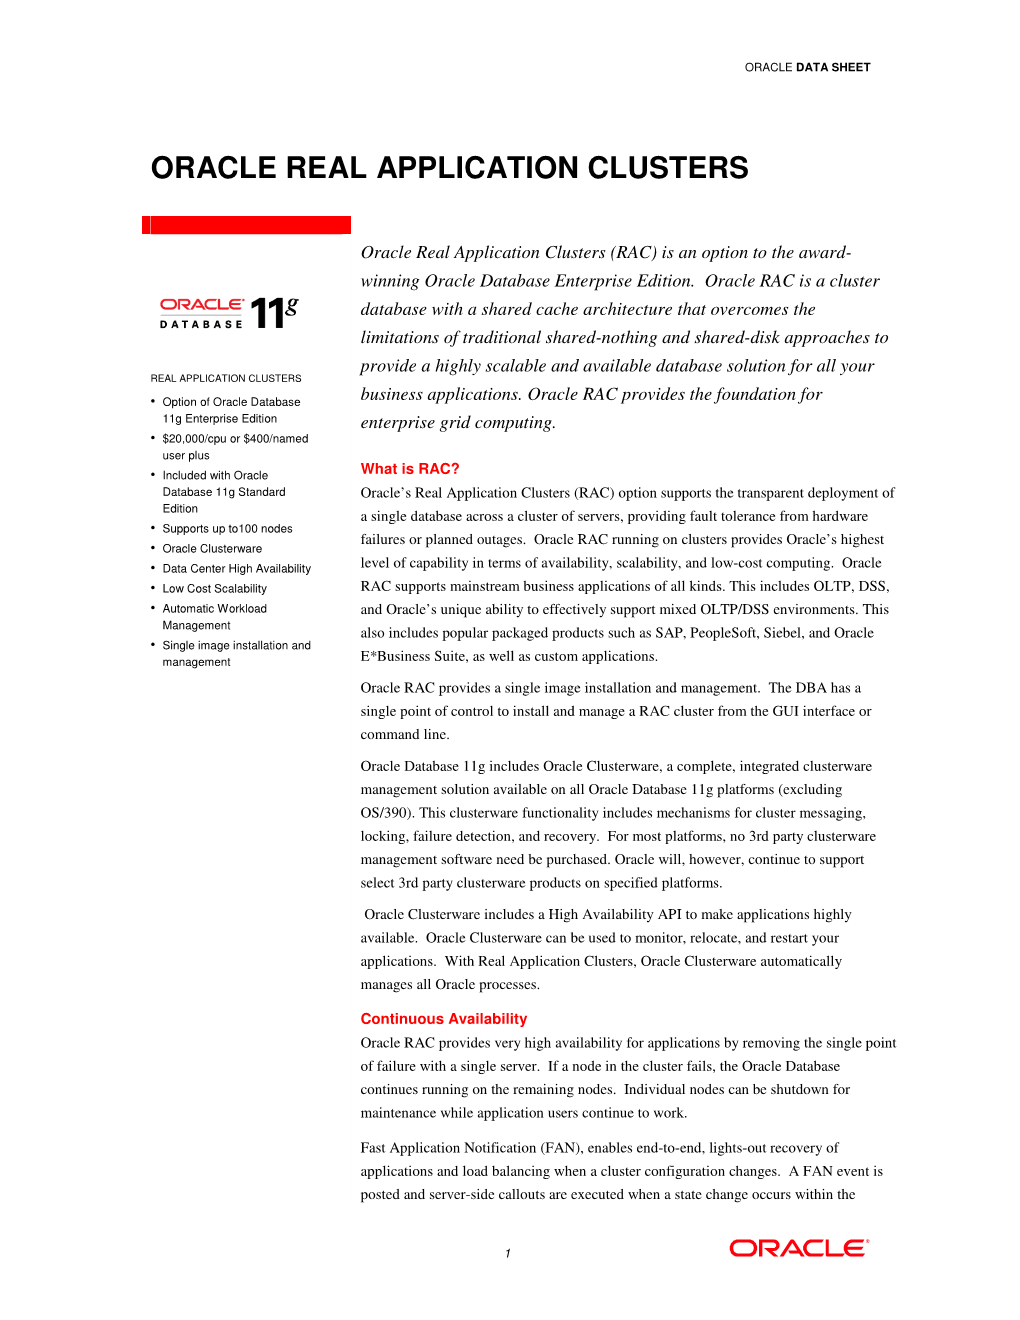 Oracle Real Application Clusters (RAC) Is an Option to the Award- Winning Oracle Database Enterprise Edition